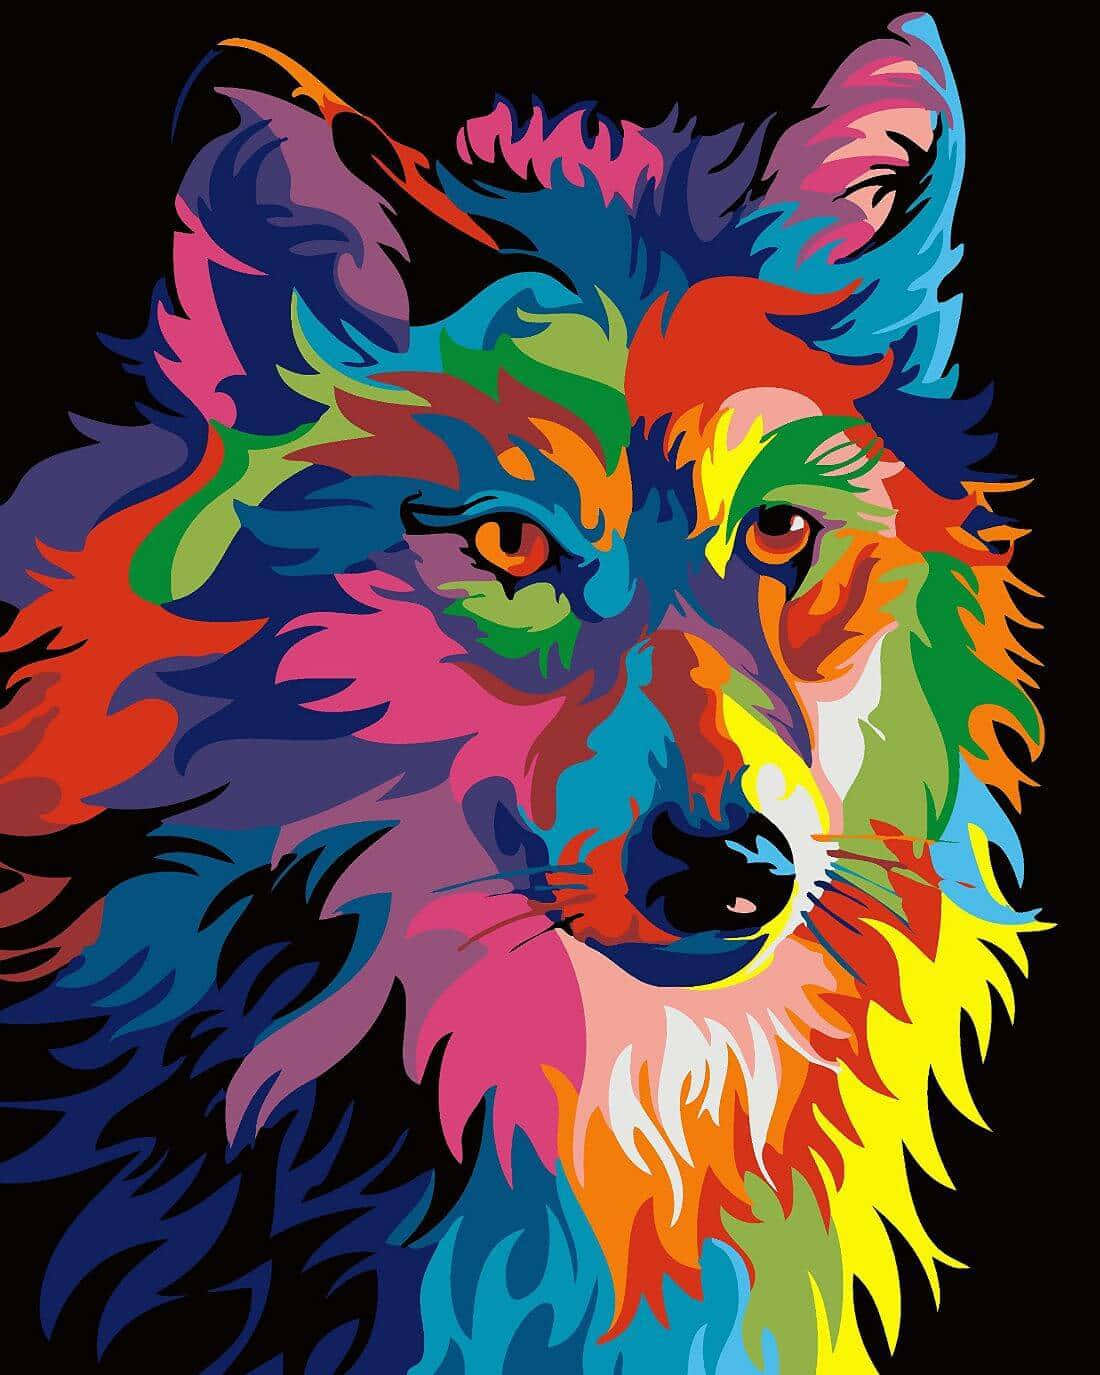 Captivating Wolf Art with Surreal Galaxy Background Wallpaper